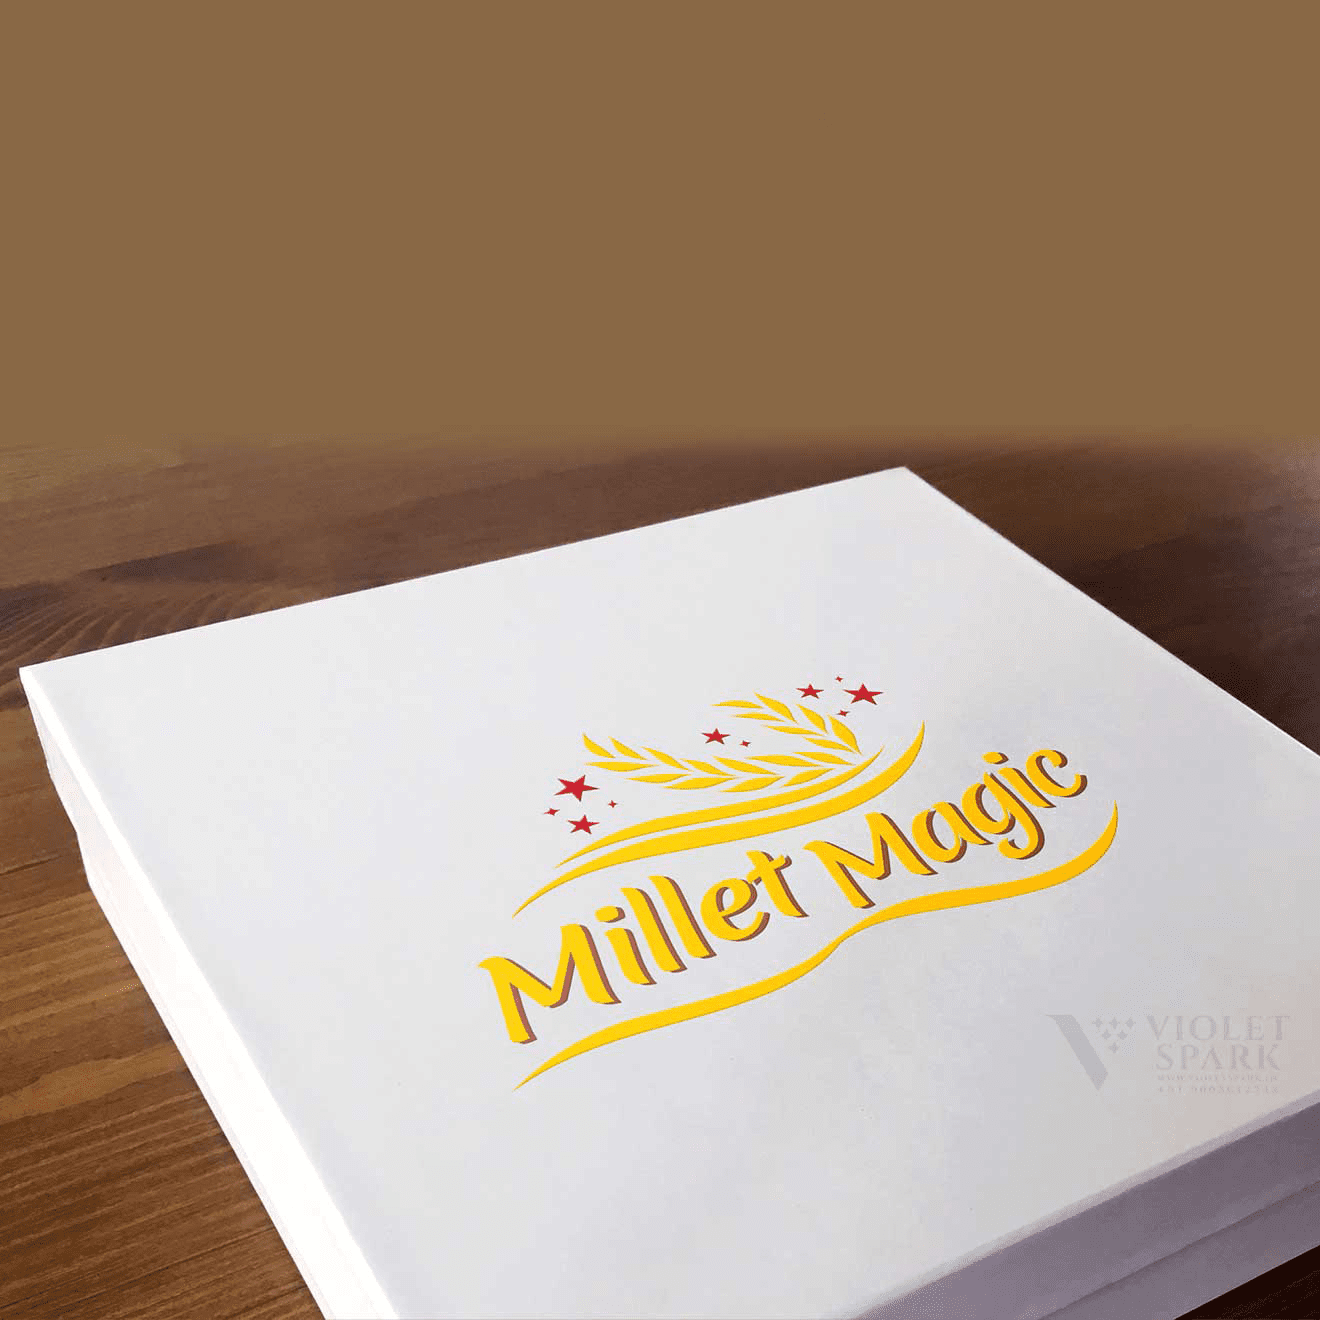 Millet Magic Gift Box Packaging Graphic Design, Branding Packaging Design in Chennai by Creative Prints thecreativeprints